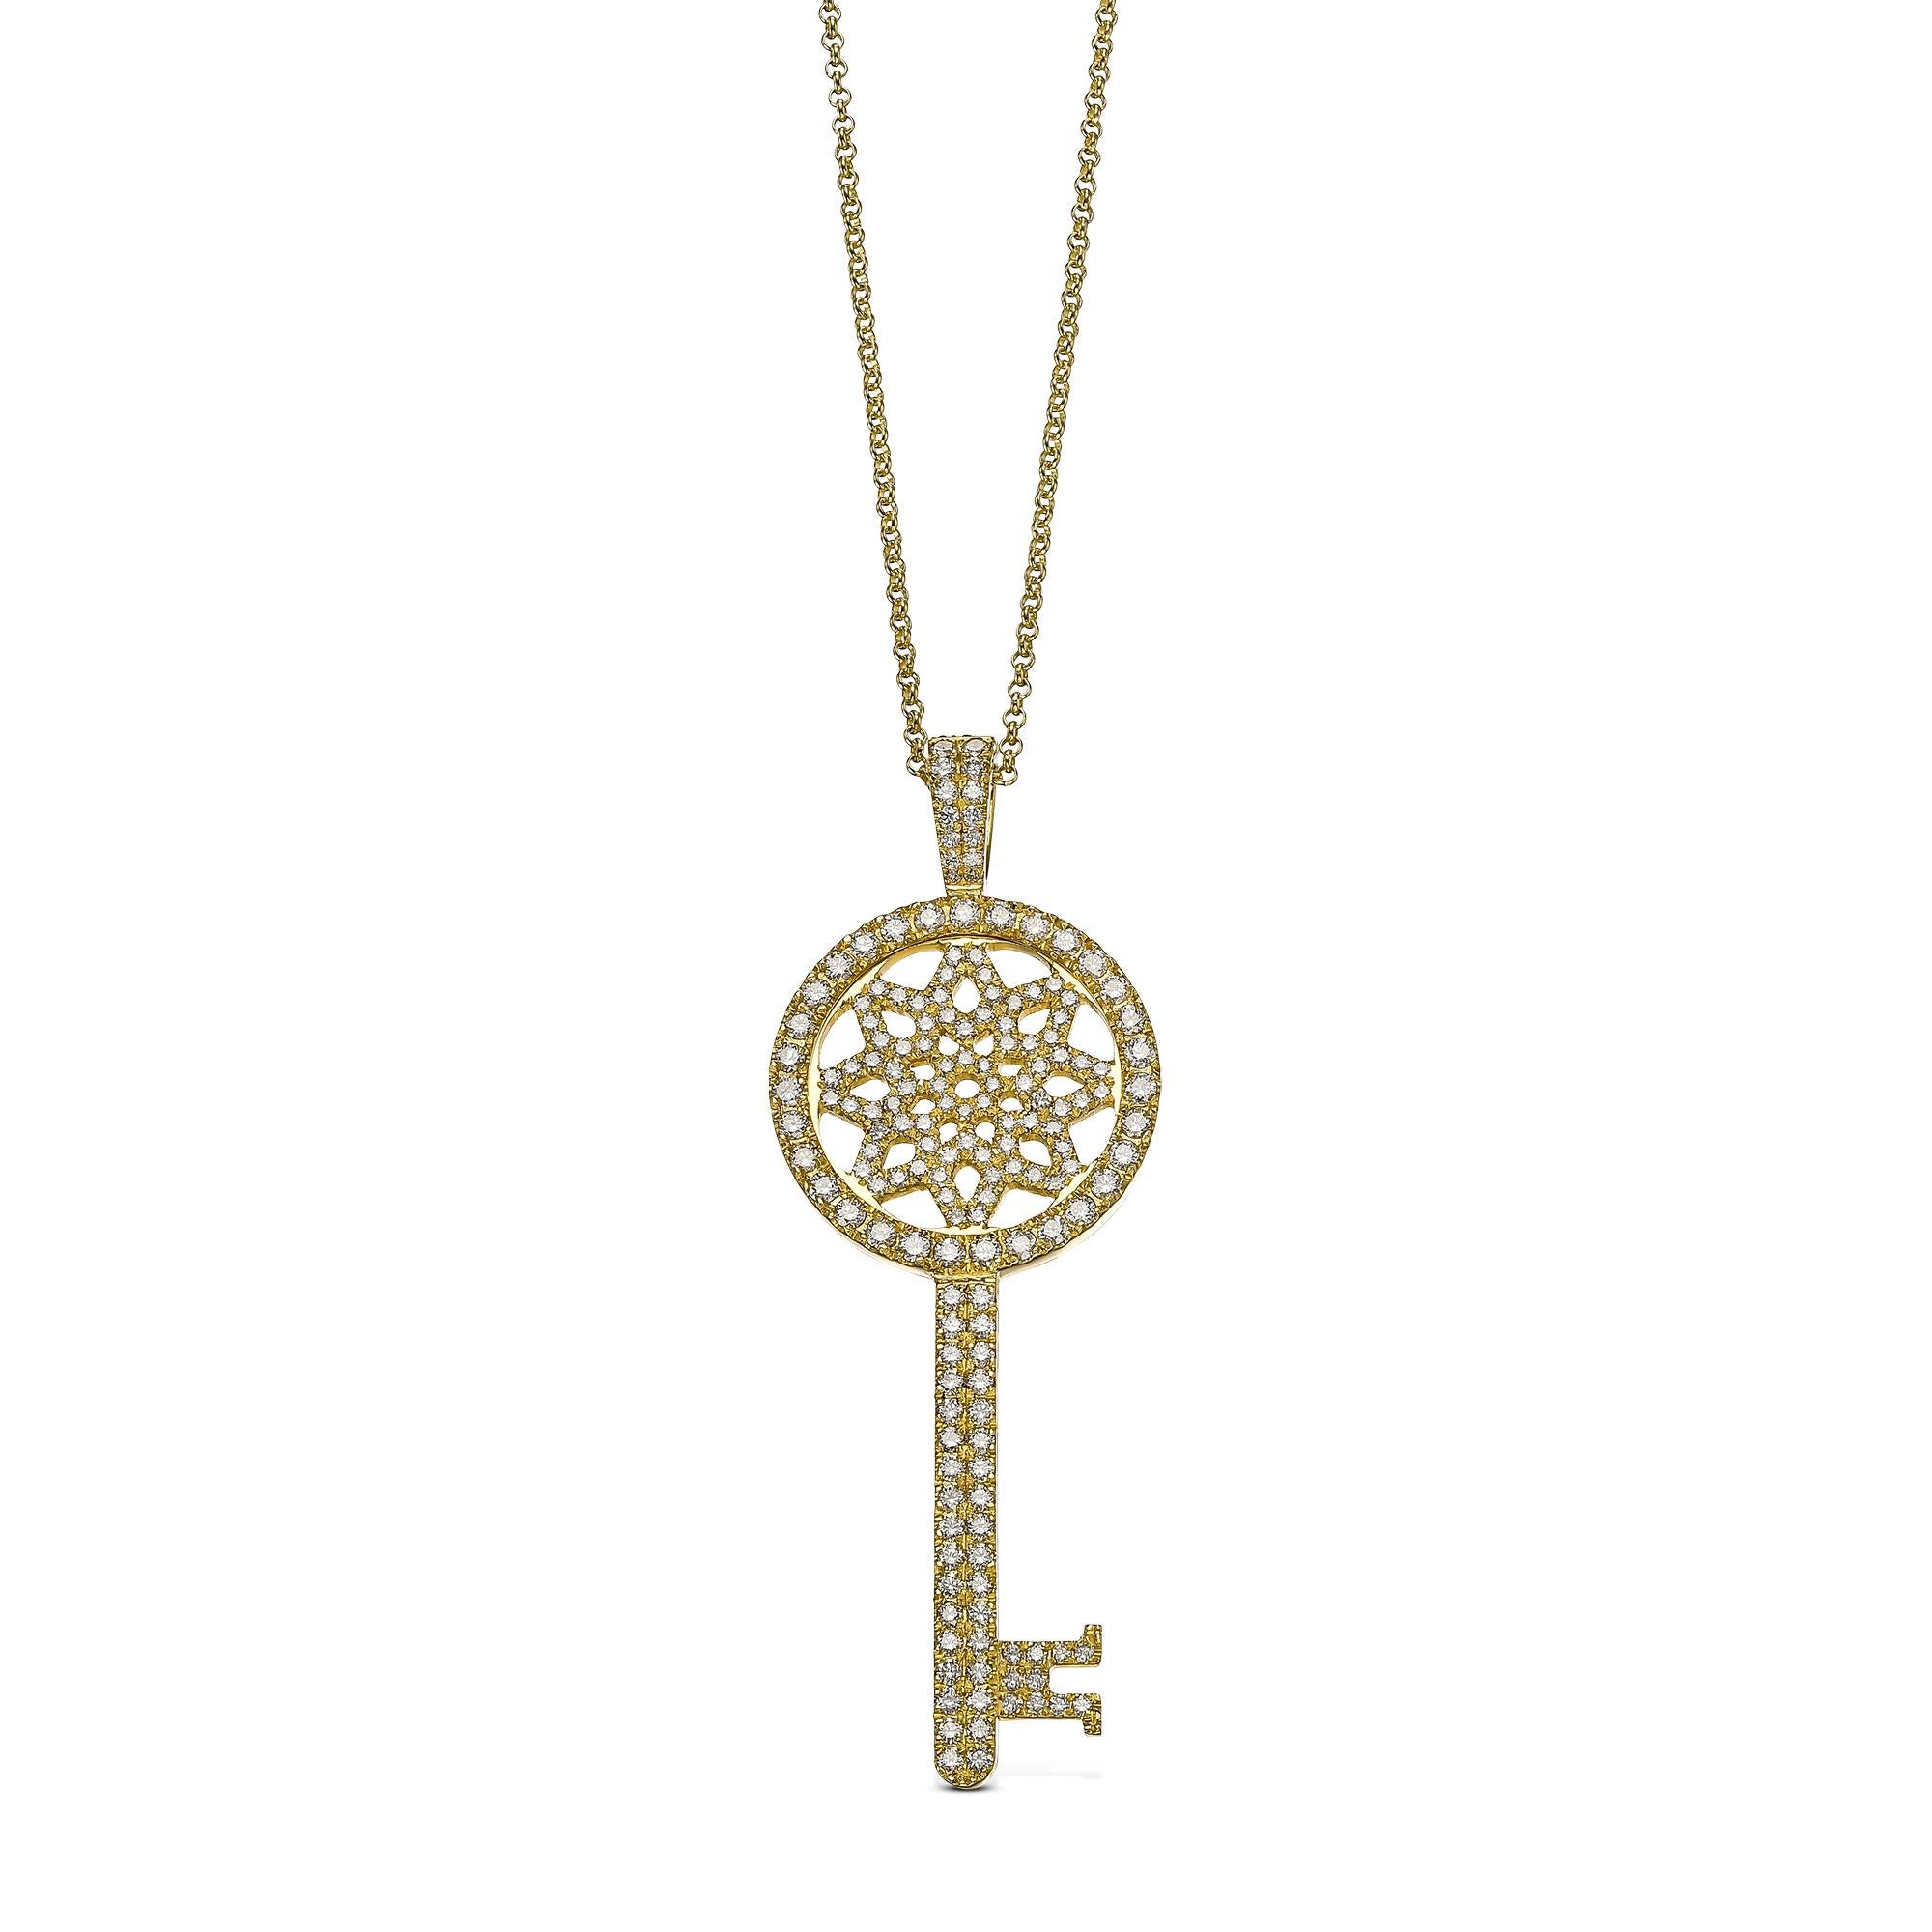 Our one of a kind 1.57 Carat key pendant is set with high quality round cut diamonds and made with exquisite craftsmanship. 
This sparkly yellow gold key pendant comes with a yellow gold necklace and will get you compliments where every you go.